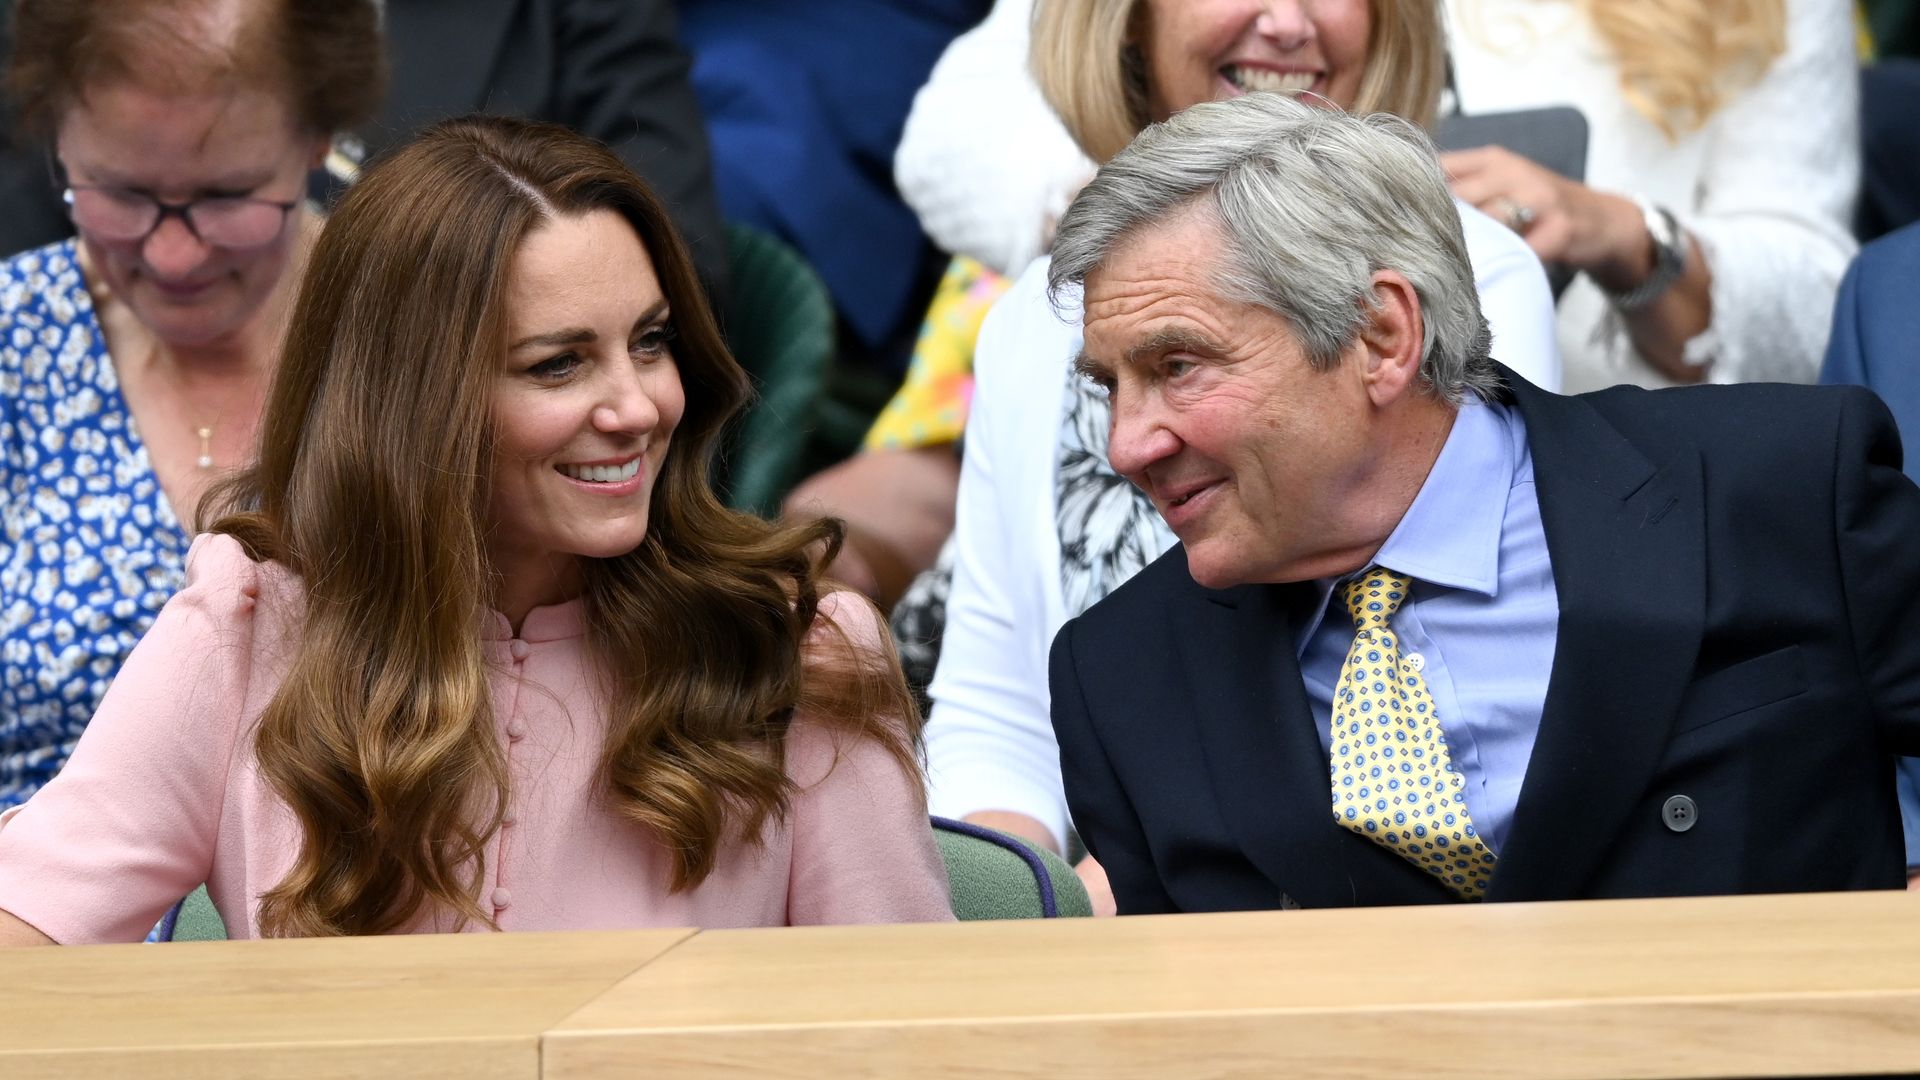 Kate and Michael Middleotn at Wimbledon 2021